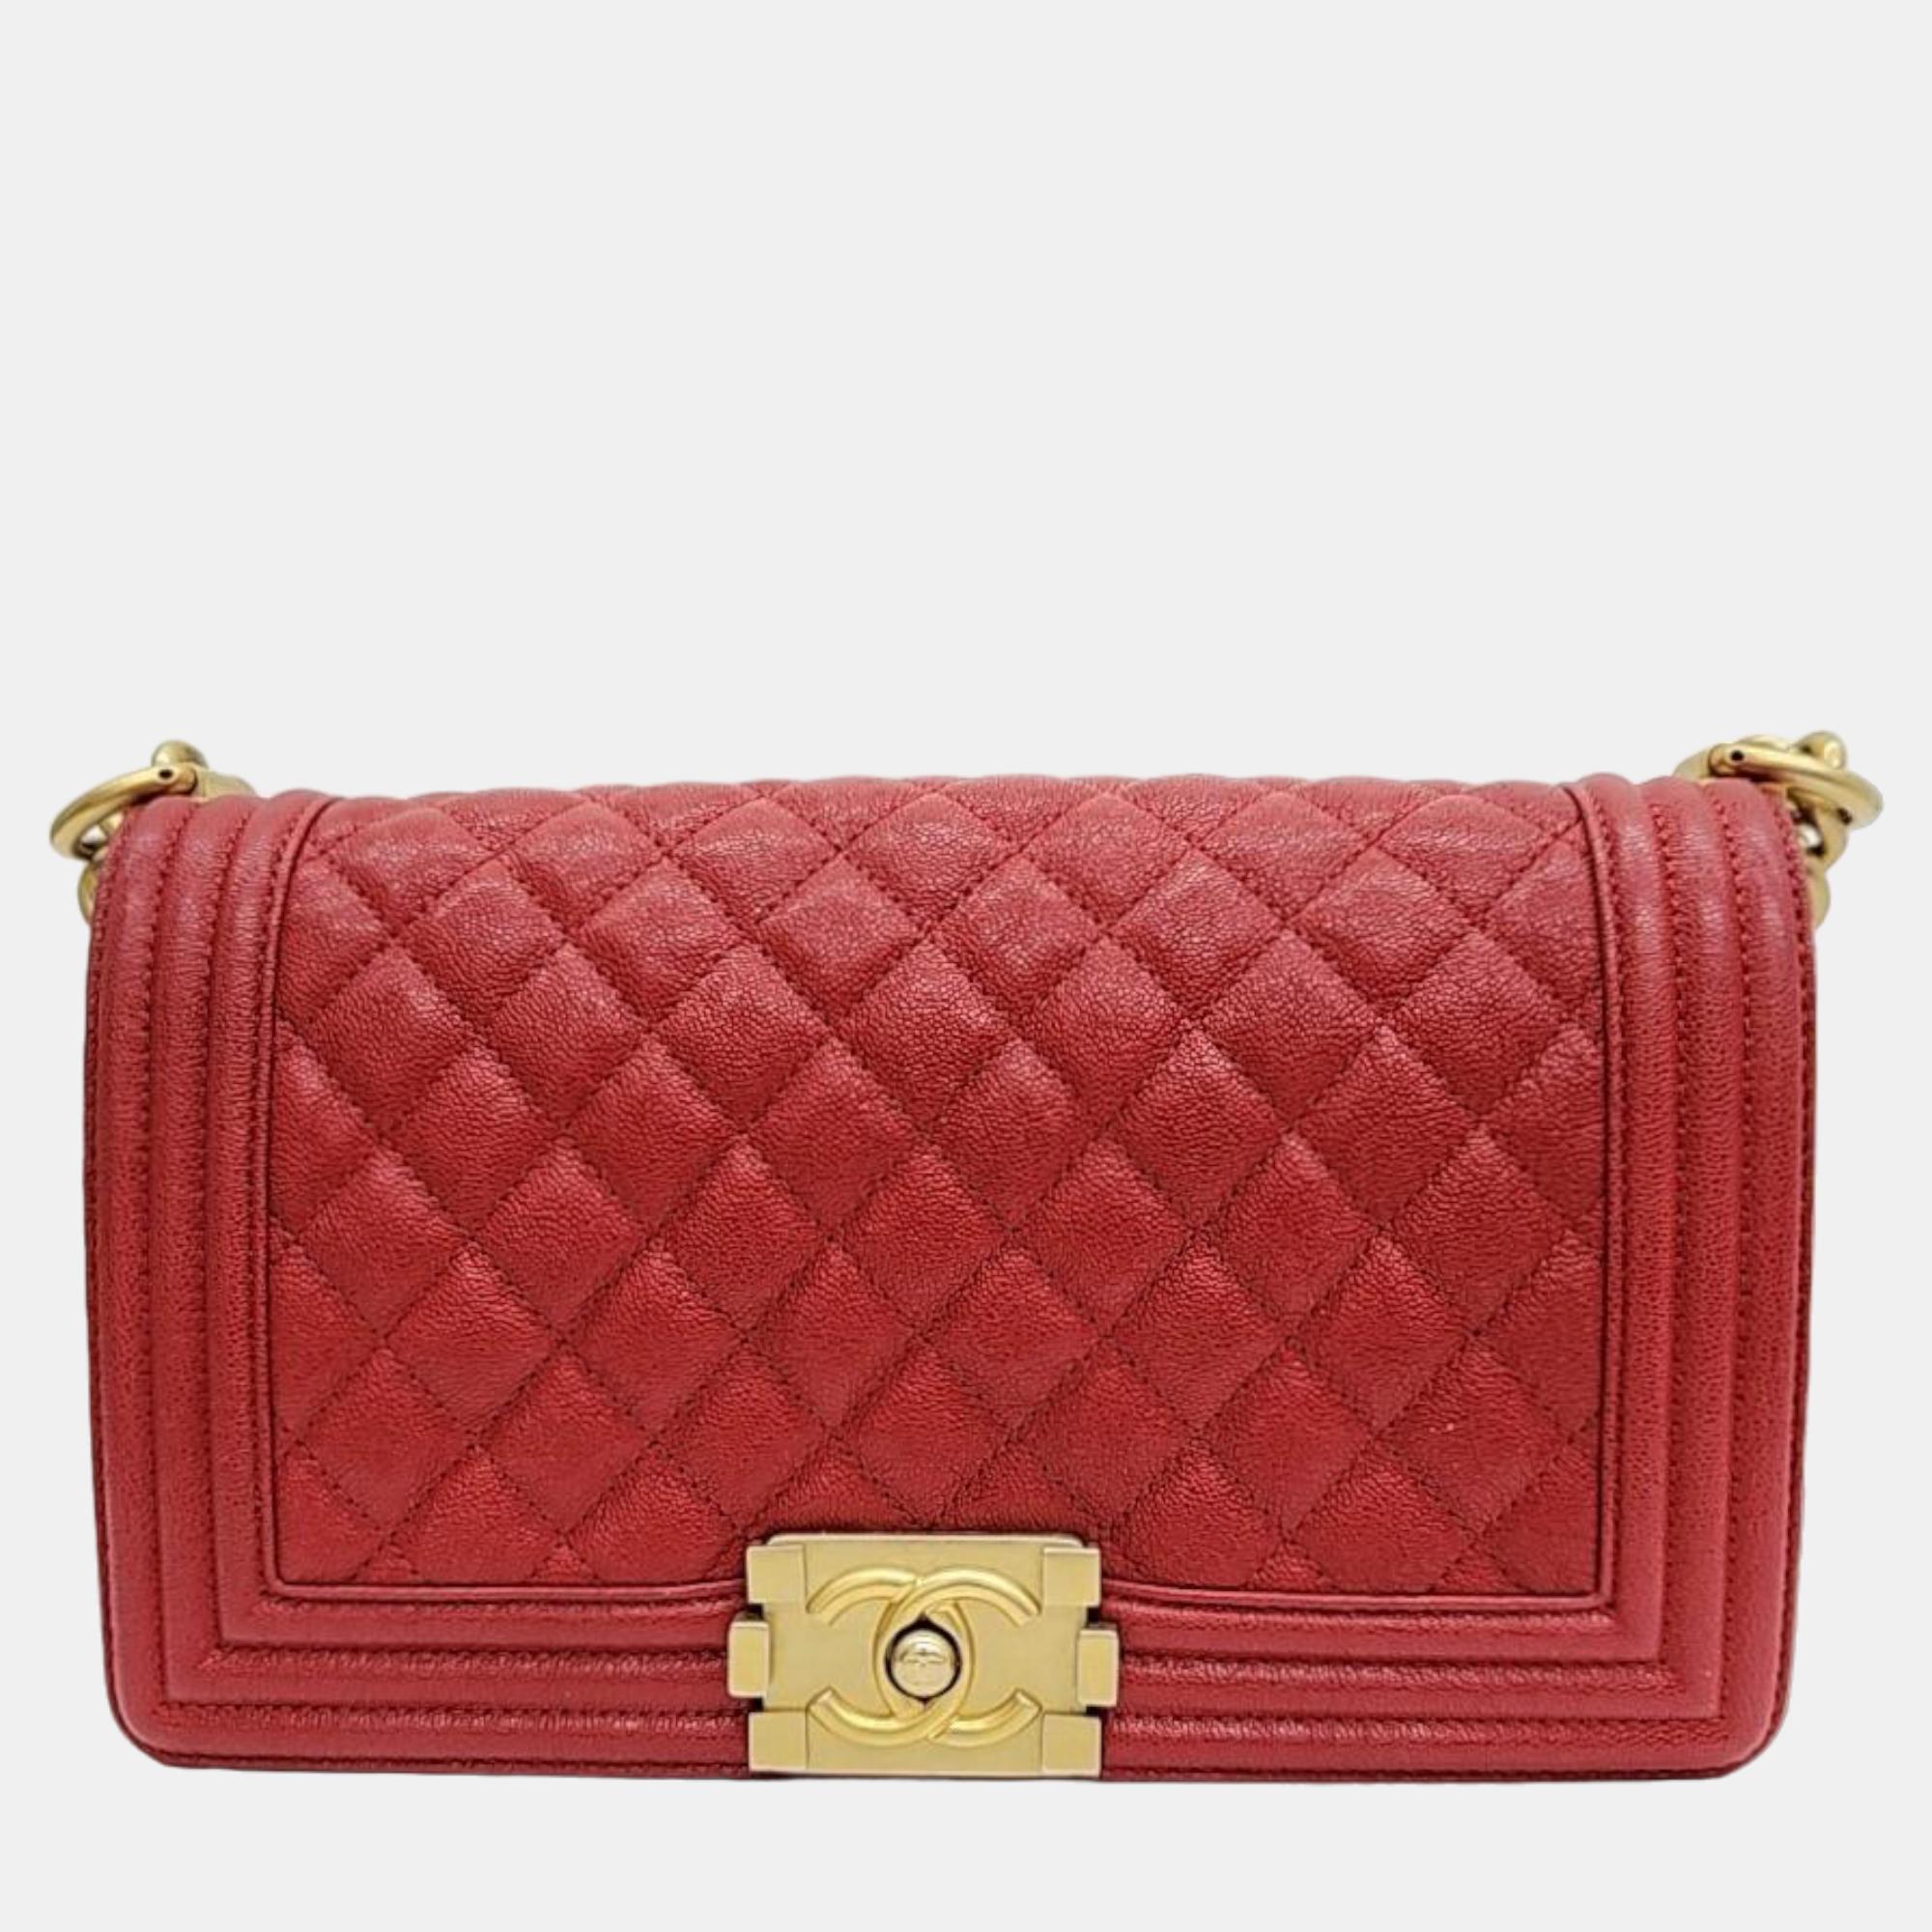 Chanel Red Quilted Caviar Leather Medium Boy Shoulder Bag